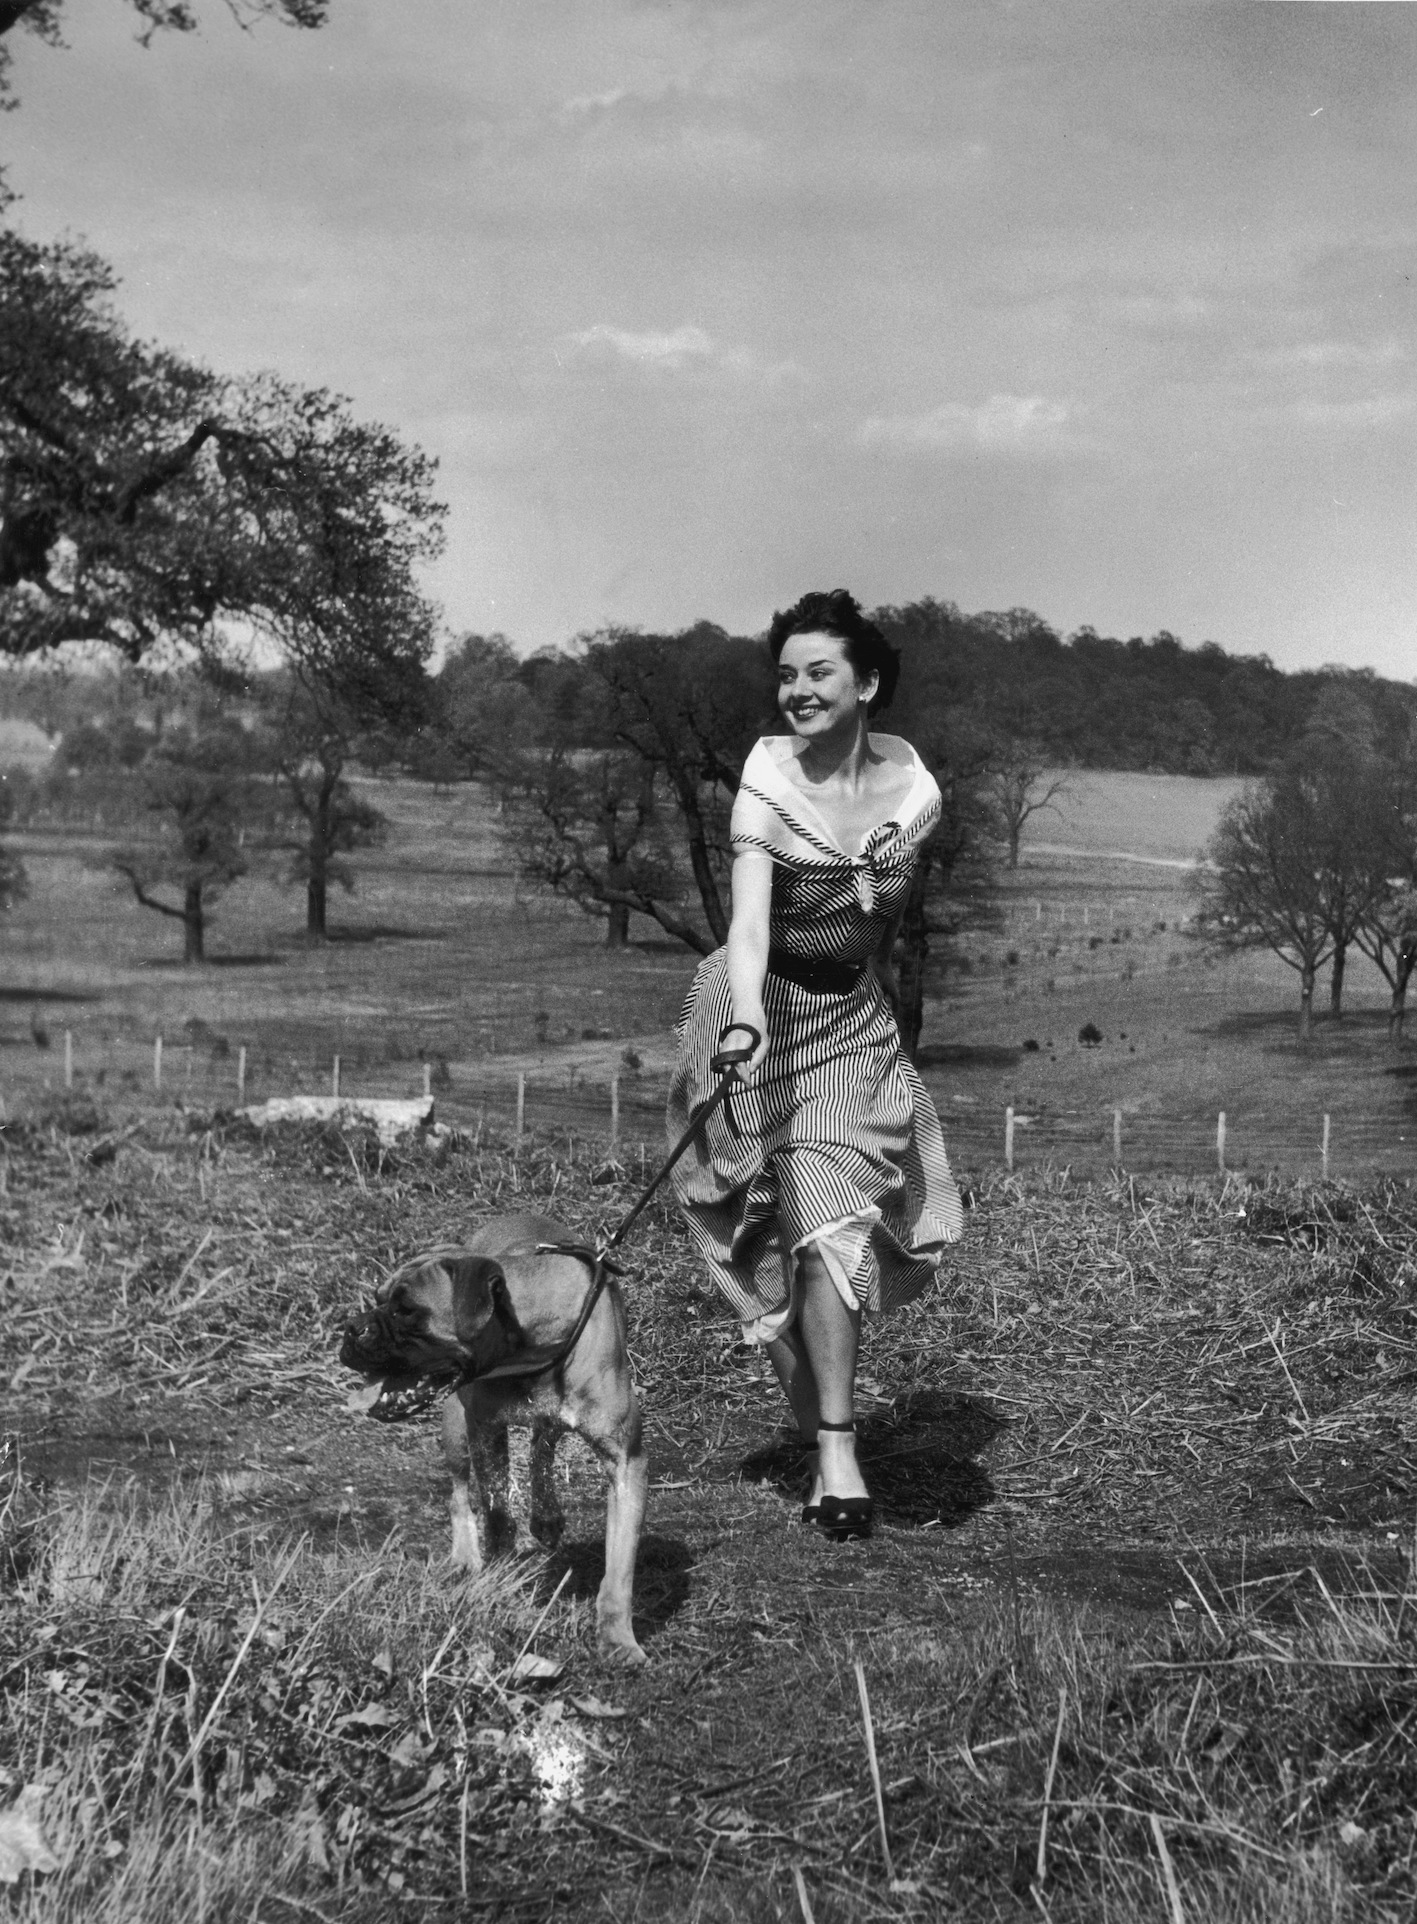 Unpublished photograph of Audrey Hepburn in Richmond Park by Bert Hardy, 30 April 1950 ©Bert Hardy/Getty Images